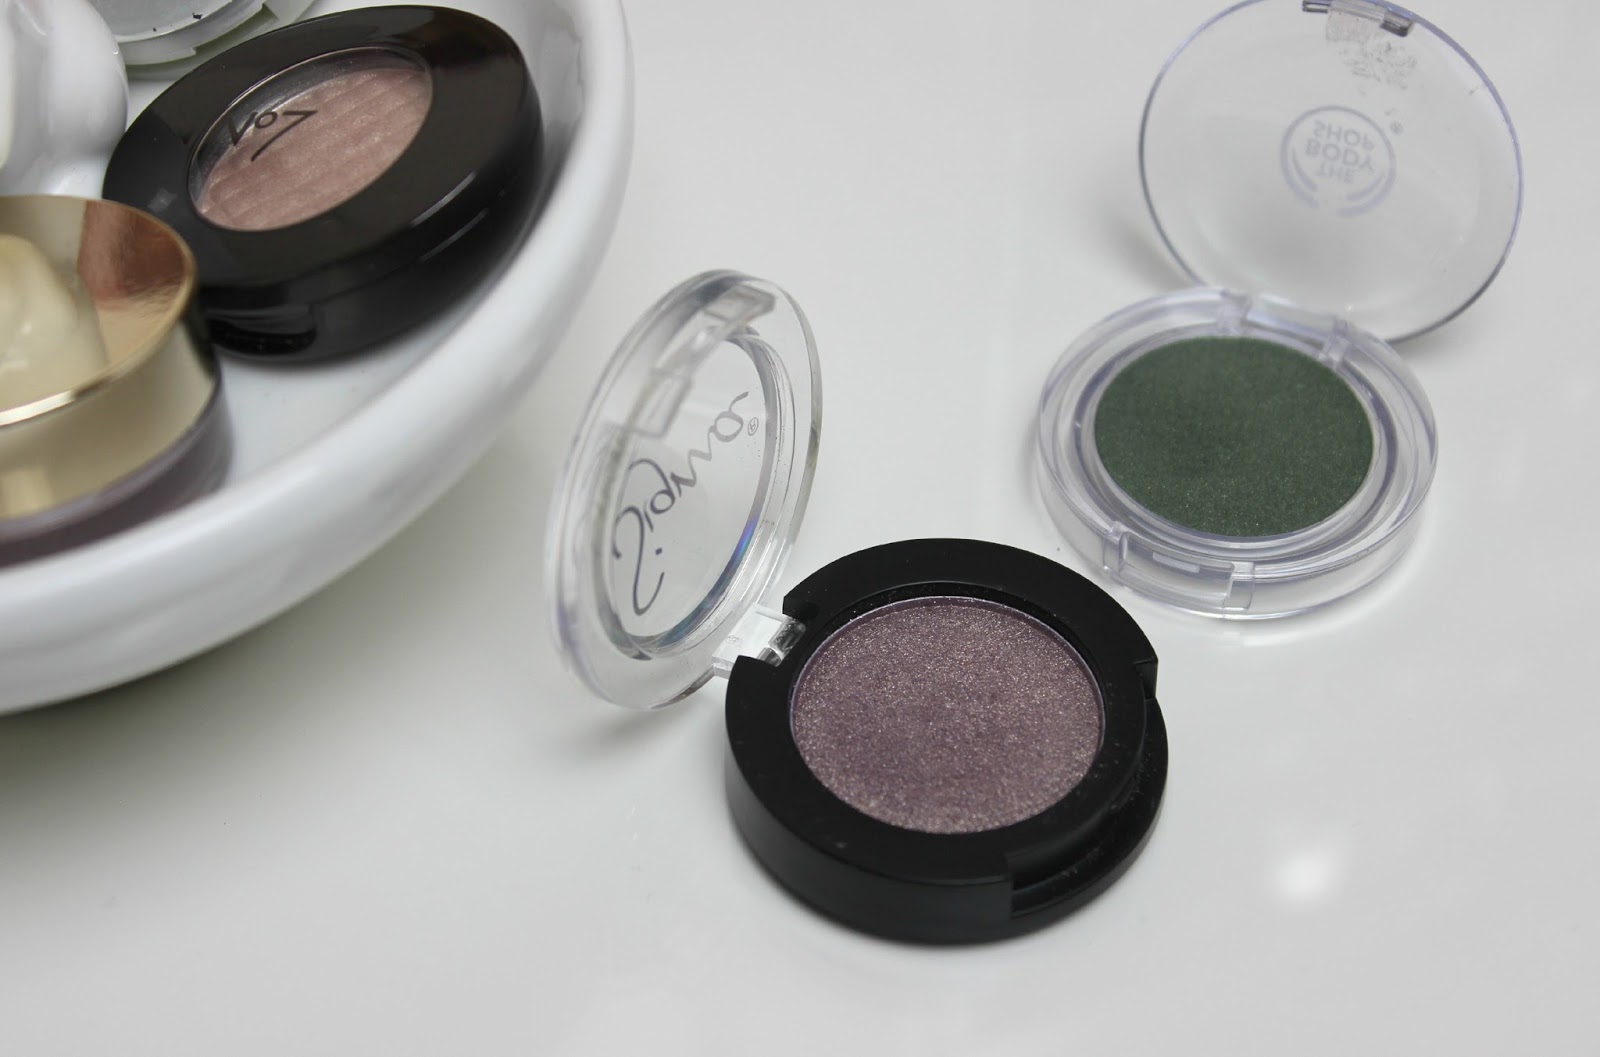 A picture of Sigma Beauty Individual Eye Shadow and The Body Shop Colour Crush Eyeshadow